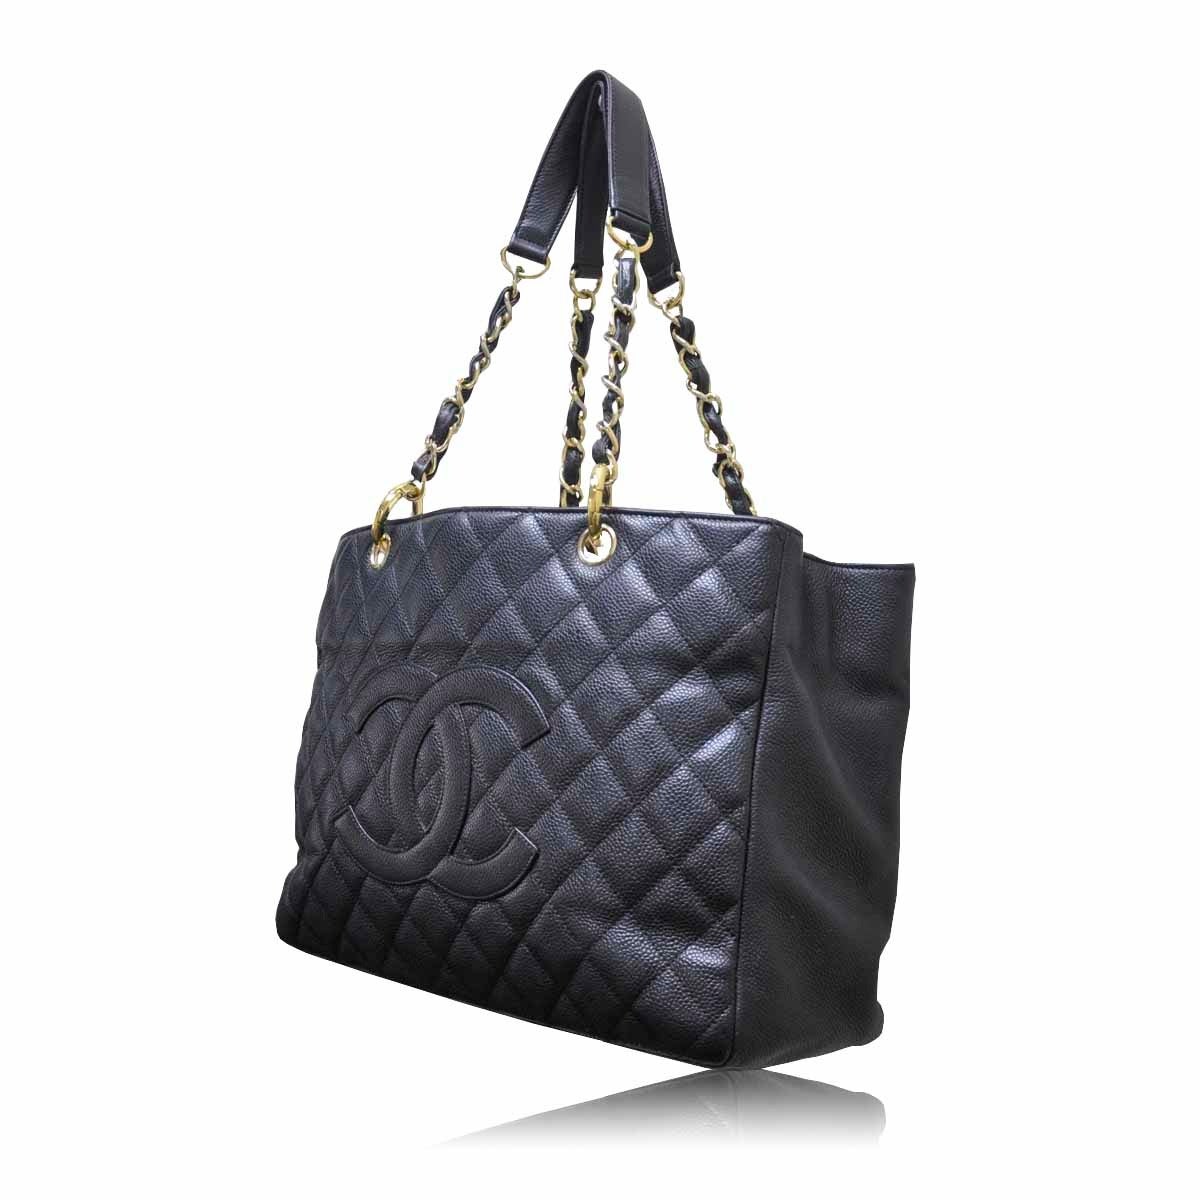 Company - CHANEL
Model - Tote / Shopper
Material - Black Leather
Hardware - Gold Toned
Measurements - 13″ x 10″ x 5.25″
Condition - Outside – Bag has some fold marks, one small white mark on the back side.  Overall 8/10 condition.
Inside –